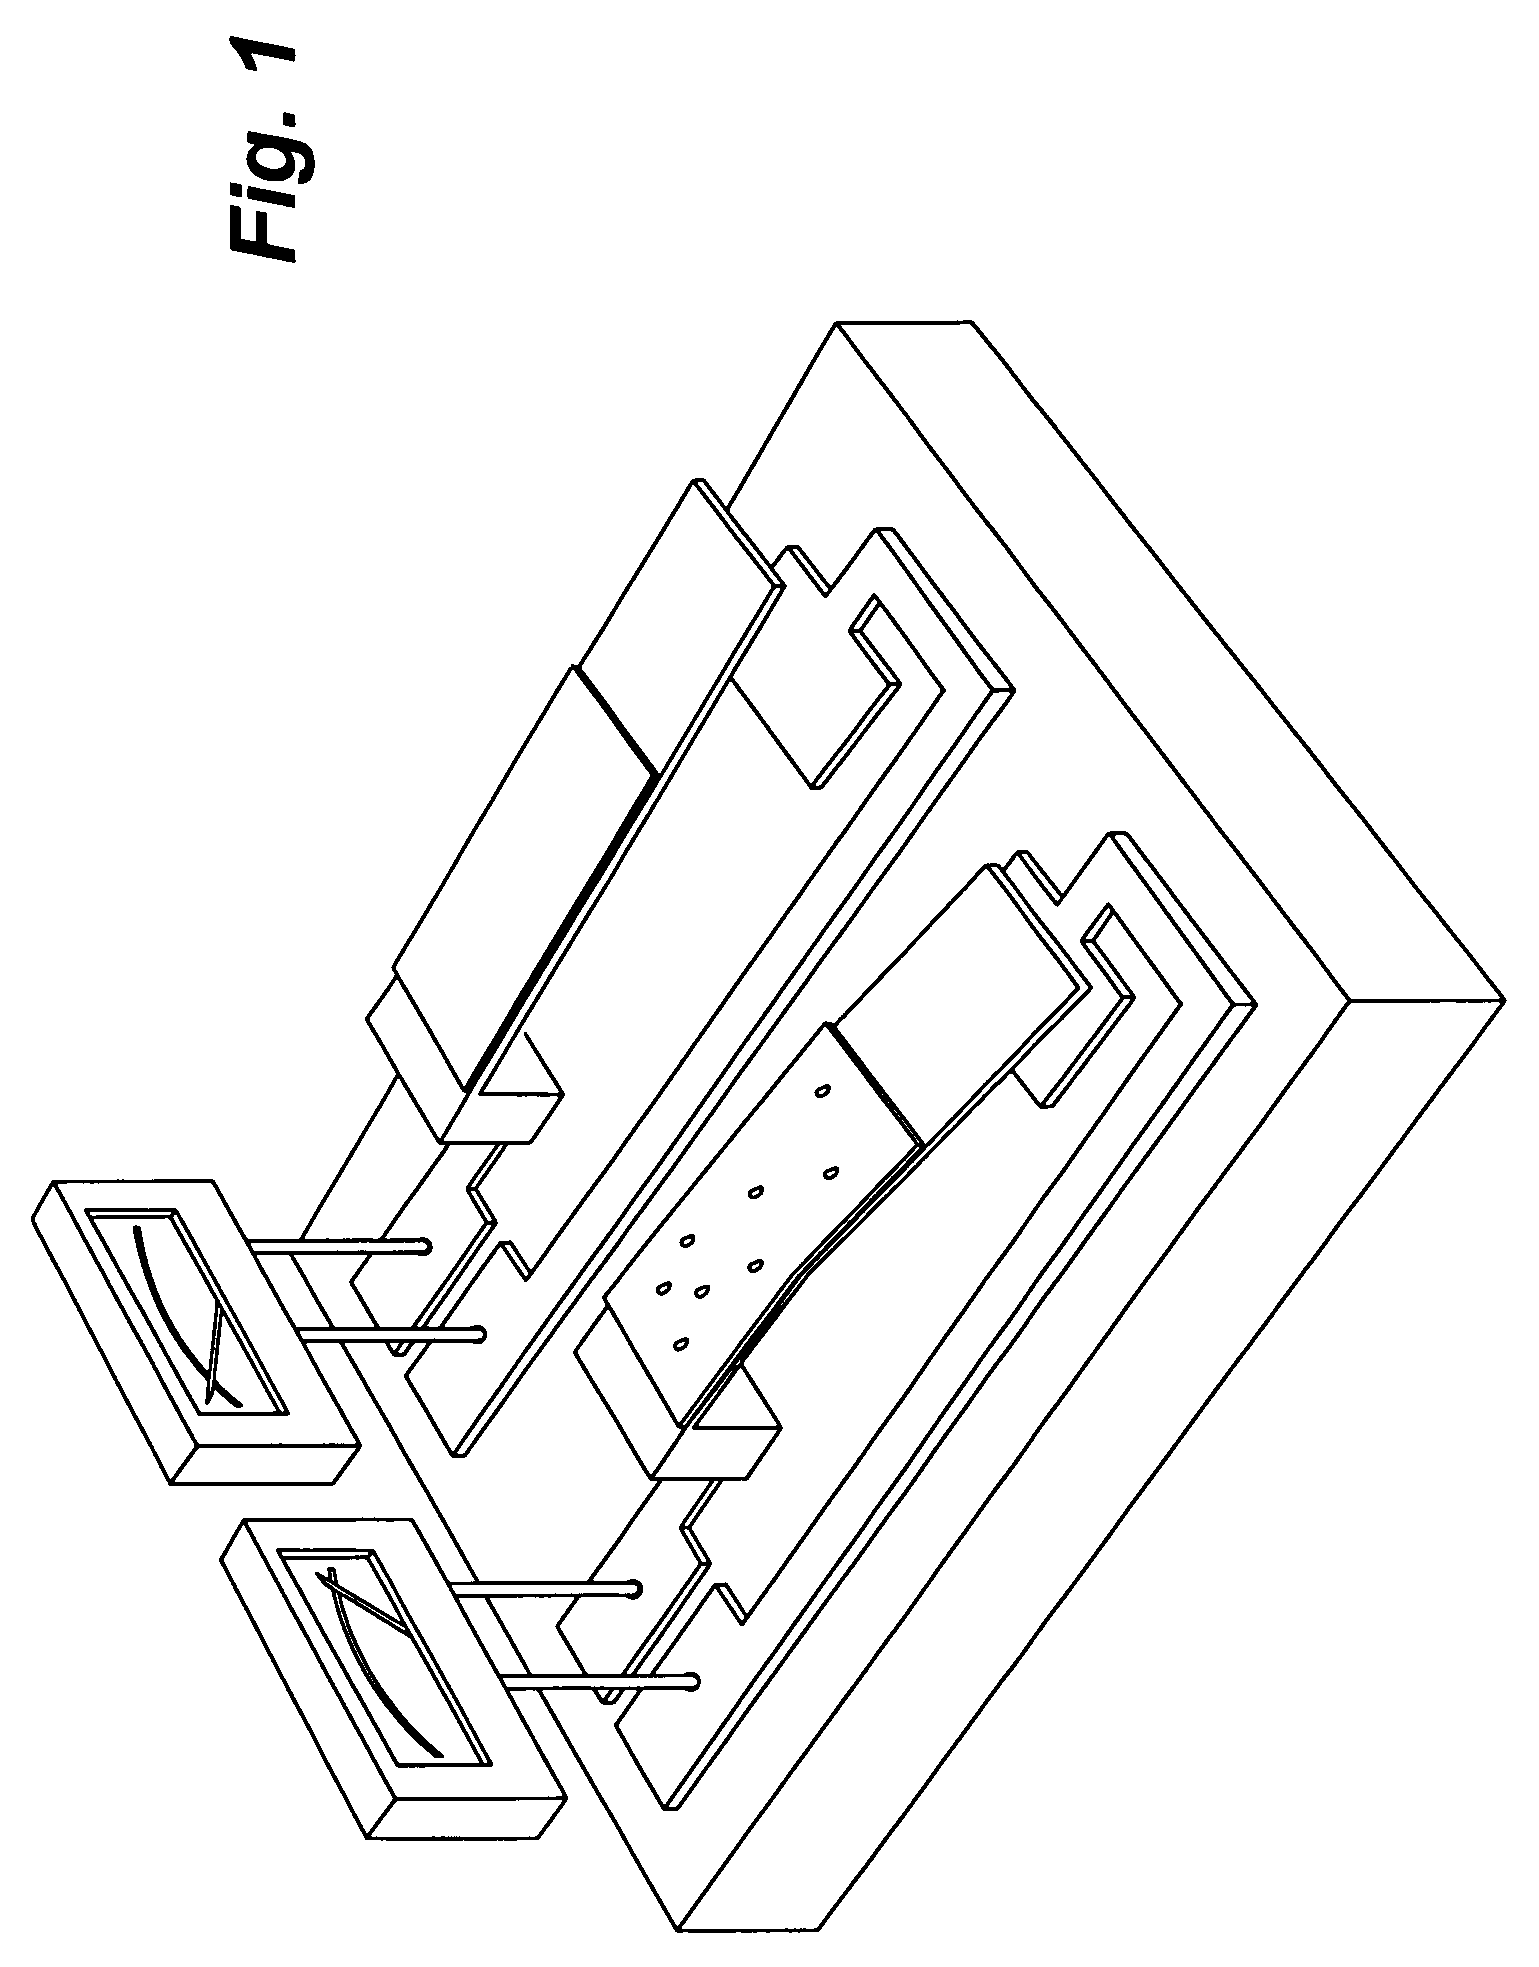 Dense thin film-based chemical sensors and methods for making and using same